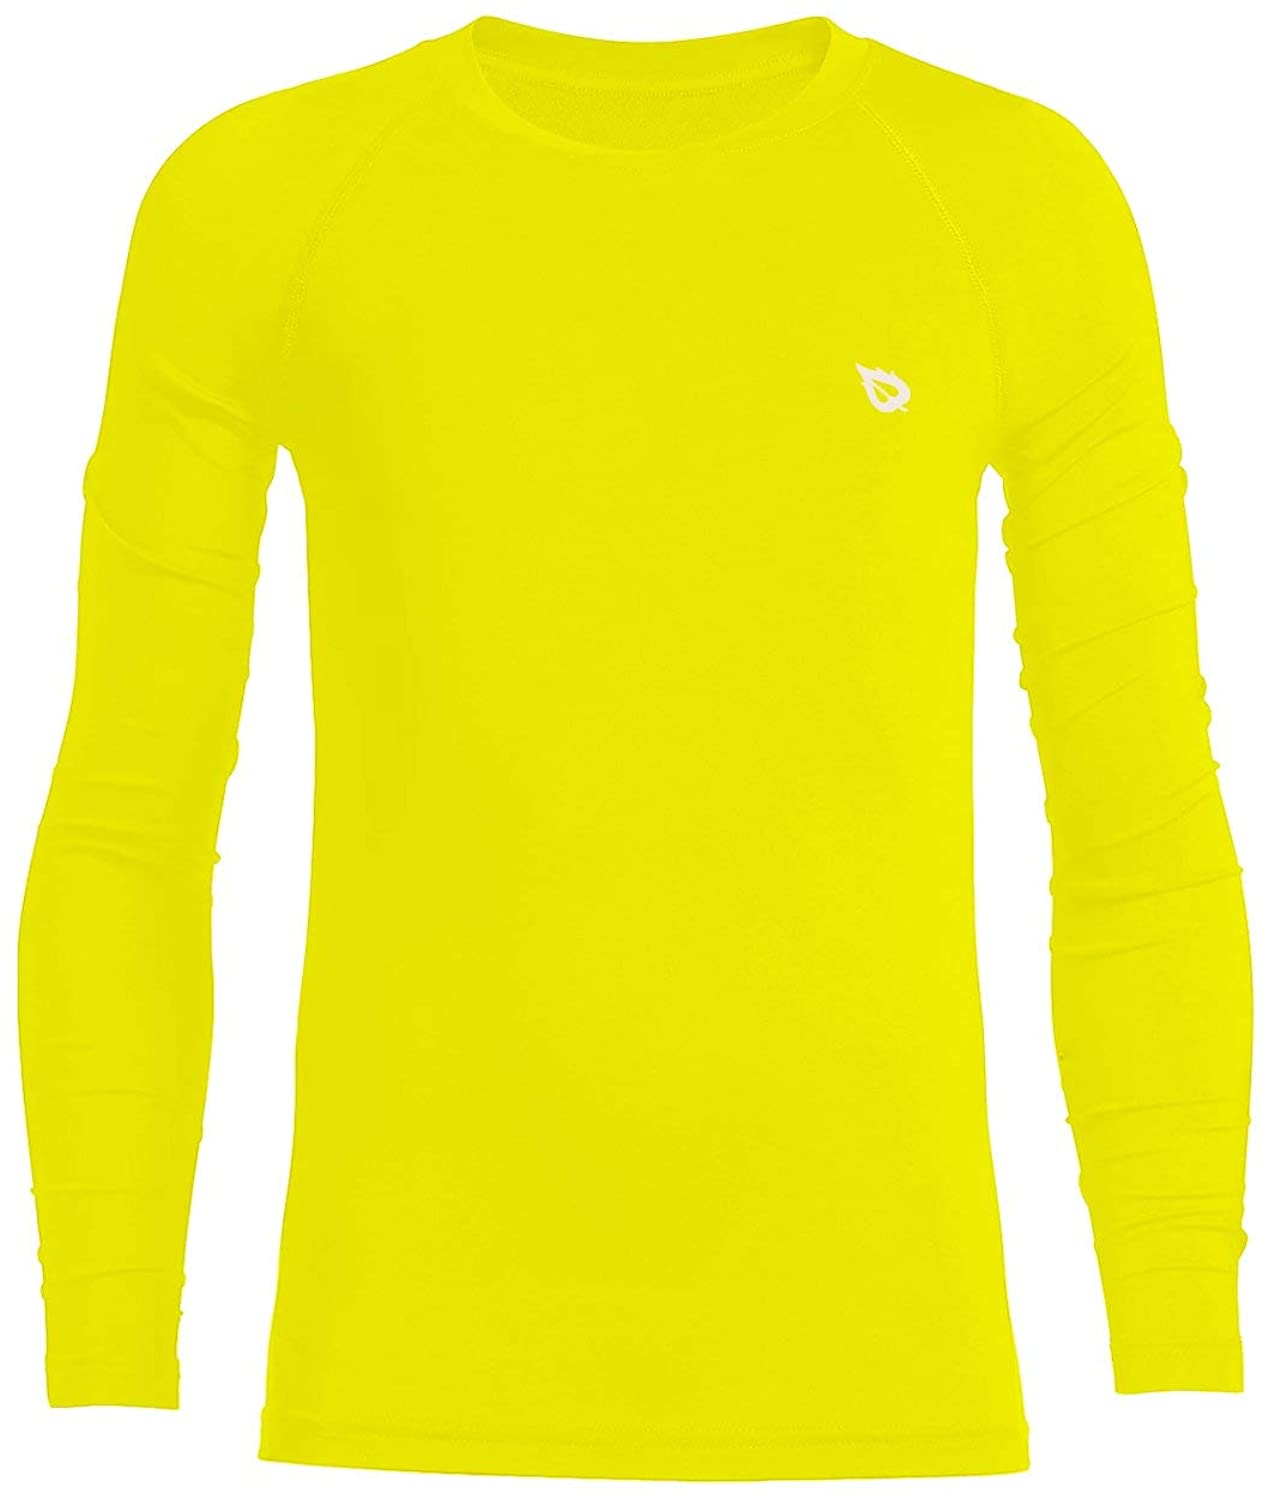 BALEAF Youth Boys Thermal Compression Sports Shirts Long Sleeve Fleece Crew  Neck Baseball Base Layer Cold Gear